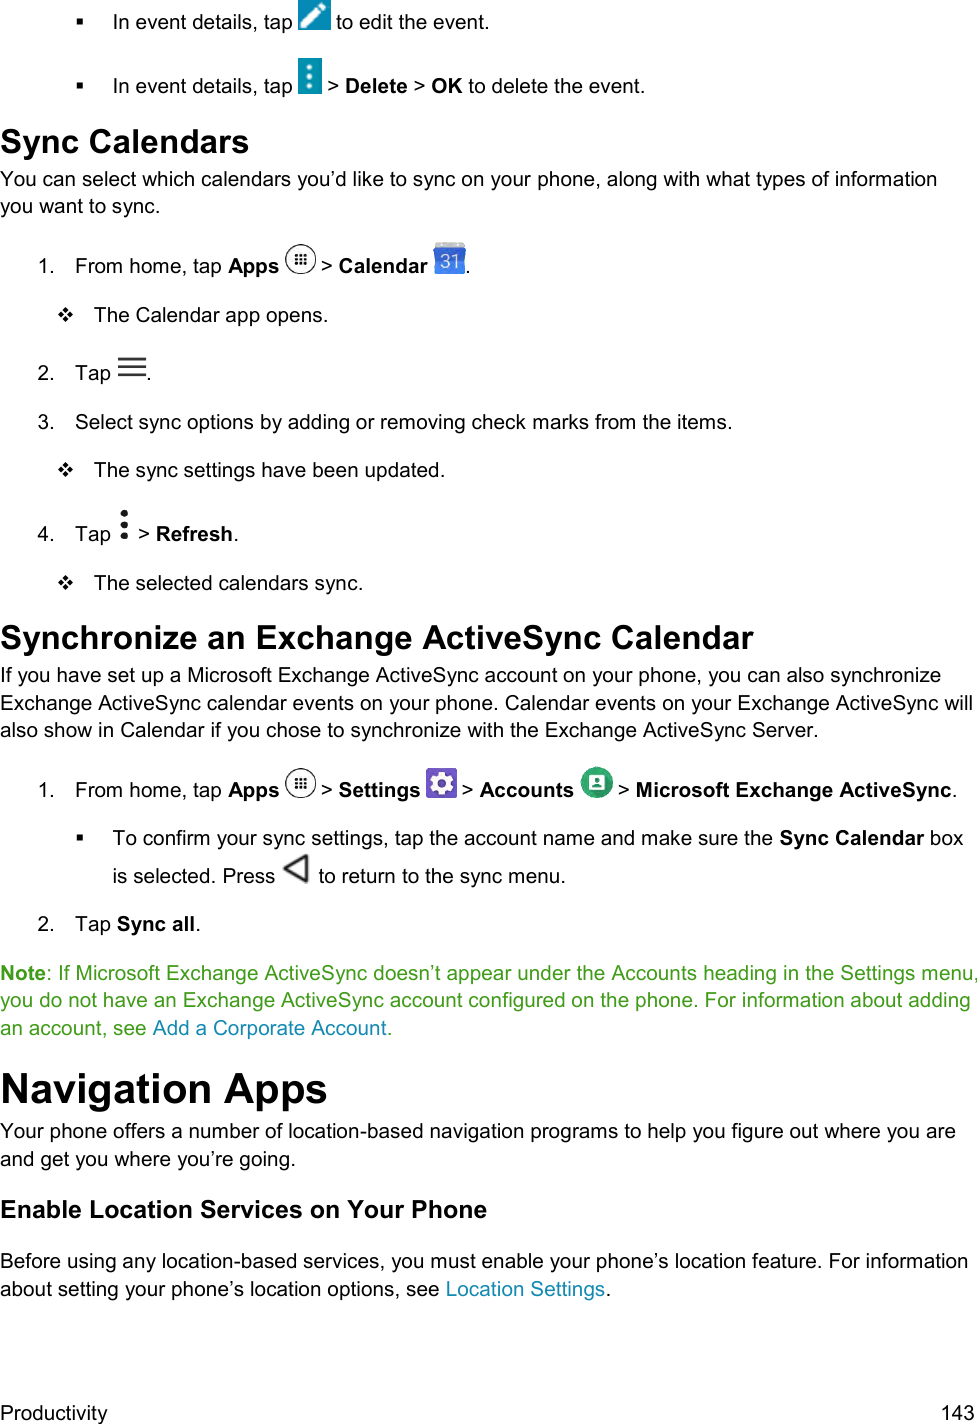  Productivity  143   In event details, tap   to edit the event.   In event details, tap   &gt; Delete &gt; OK to delete the event. Sync Calendars You can select which calendars you’d like to sync on your phone, along with what types of information you want to sync. 1.  From home, tap Apps   &gt; Calendar  .    The Calendar app opens. 2.  Tap  .  3.  Select sync options by adding or removing check marks from the items.    The sync settings have been updated. 4.  Tap   &gt; Refresh.    The selected calendars sync. Synchronize an Exchange ActiveSync Calendar  If you have set up a Microsoft Exchange ActiveSync account on your phone, you can also synchronize Exchange ActiveSync calendar events on your phone. Calendar events on your Exchange ActiveSync will also show in Calendar if you chose to synchronize with the Exchange ActiveSync Server. 1.  From home, tap Apps   &gt; Settings   &gt; Accounts   &gt; Microsoft Exchange ActiveSync.    To confirm your sync settings, tap the account name and make sure the Sync Calendar box is selected. Press   to return to the sync menu. 2.  Tap Sync all. Note: If Microsoft Exchange ActiveSync doesn’t appear under the Accounts heading in the Settings menu, you do not have an Exchange ActiveSync account configured on the phone. For information about adding an account, see Add a Corporate Account. Navigation Apps Your phone offers a number of location-based navigation programs to help you figure out where you are and get you where you’re going. Enable Location Services on Your Phone Before using any location-based services, you must enable your phone’s location feature. For information about setting your phone’s location options, see Location Settings.  